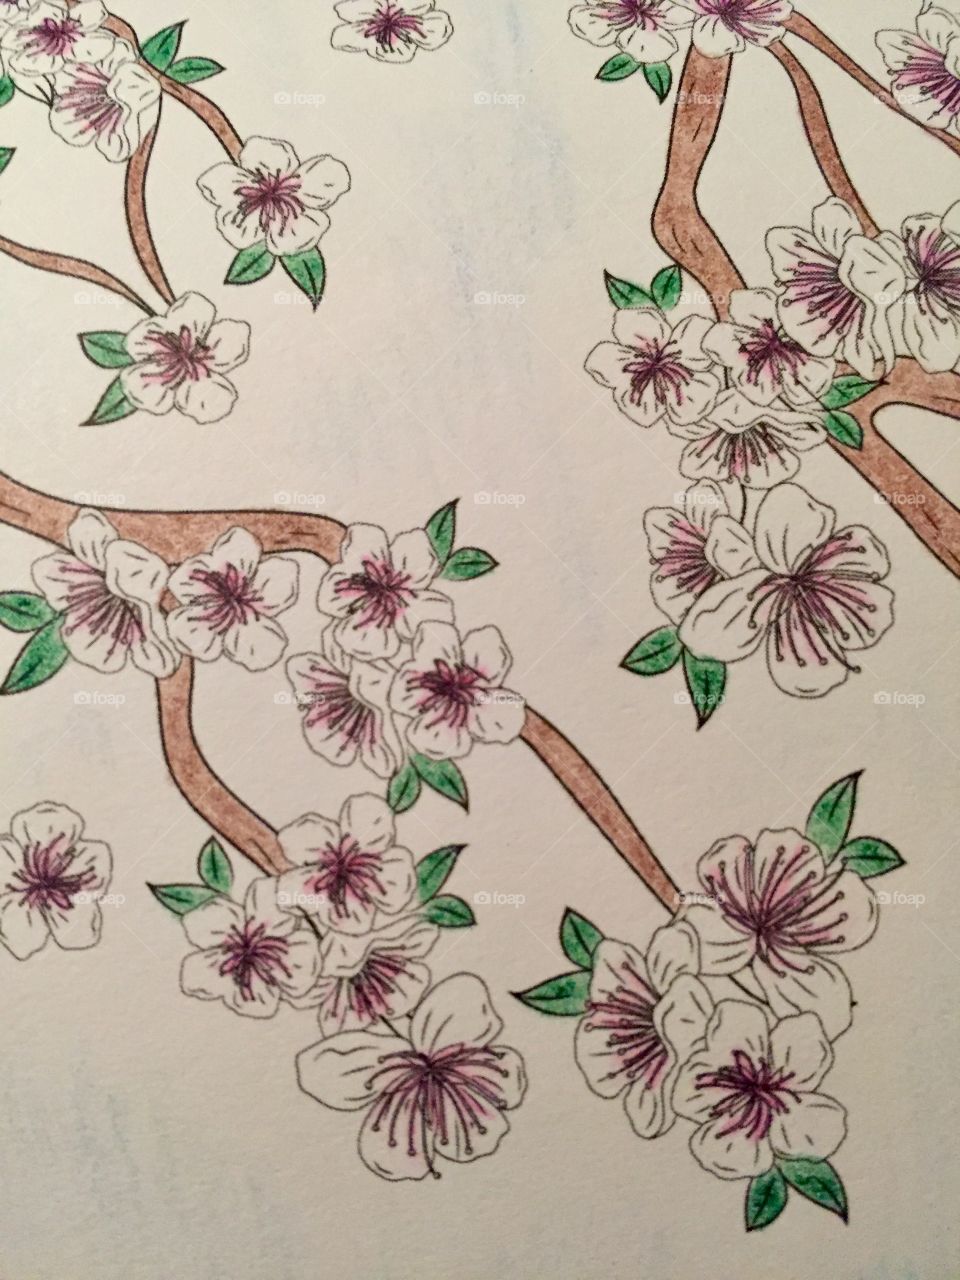 Animated tree. Adult coloring book. Pretty picture. Nice past time. Color variation.